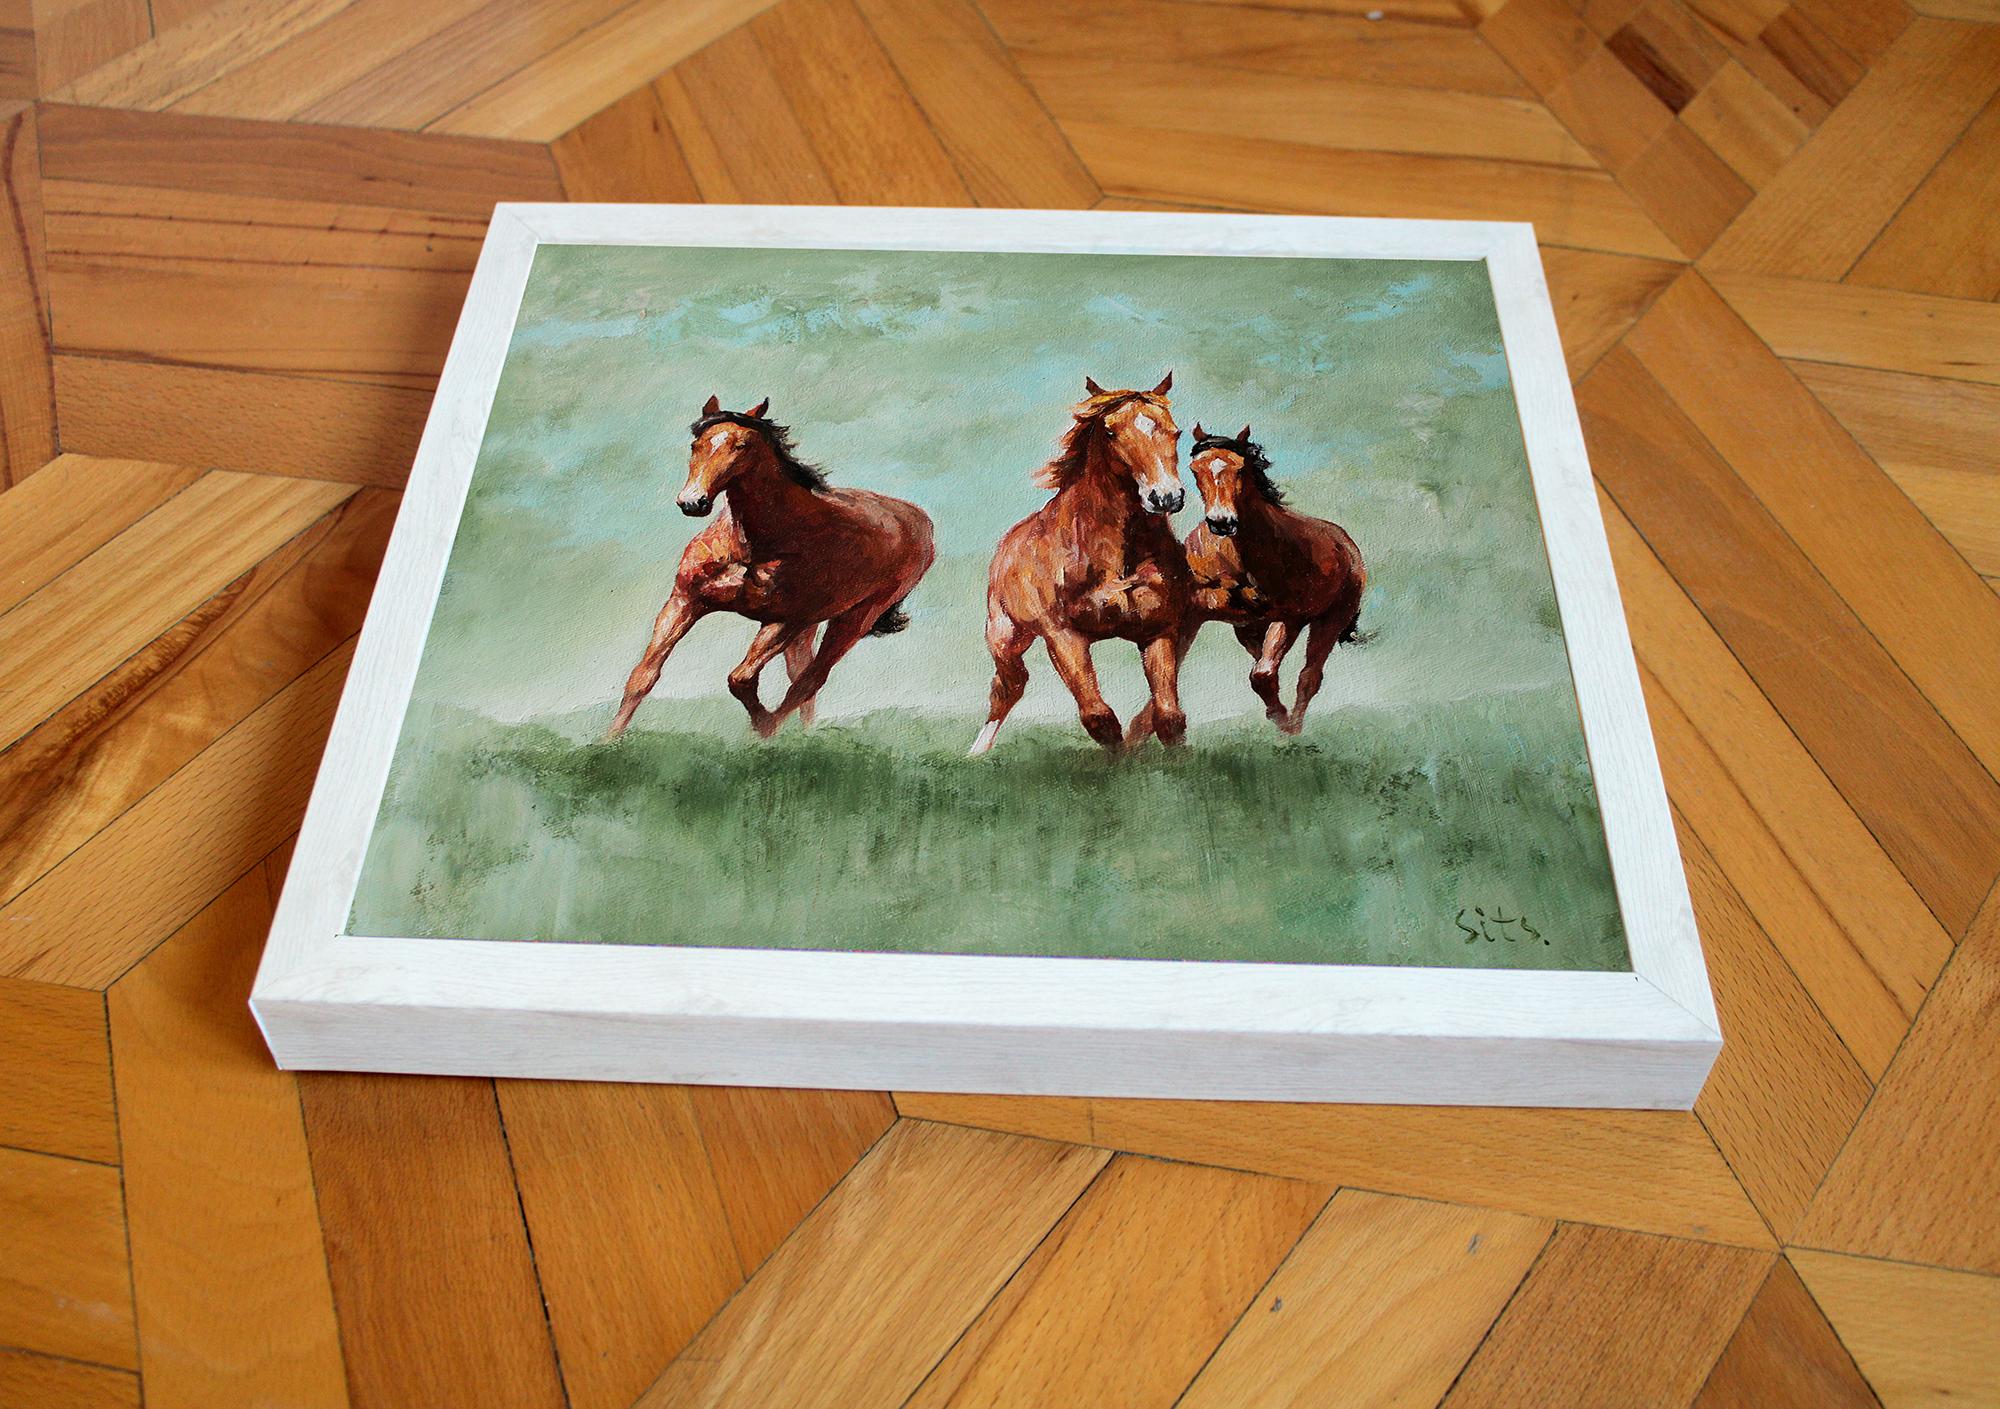 Cool blue and green colors create a special atmosphere of freshness. Running horses. Fresh wind after a summer rain. Impressions of rural nature. The painting was painted in restrained tones. Minimalist style or Scandinavian style.
• It is painted